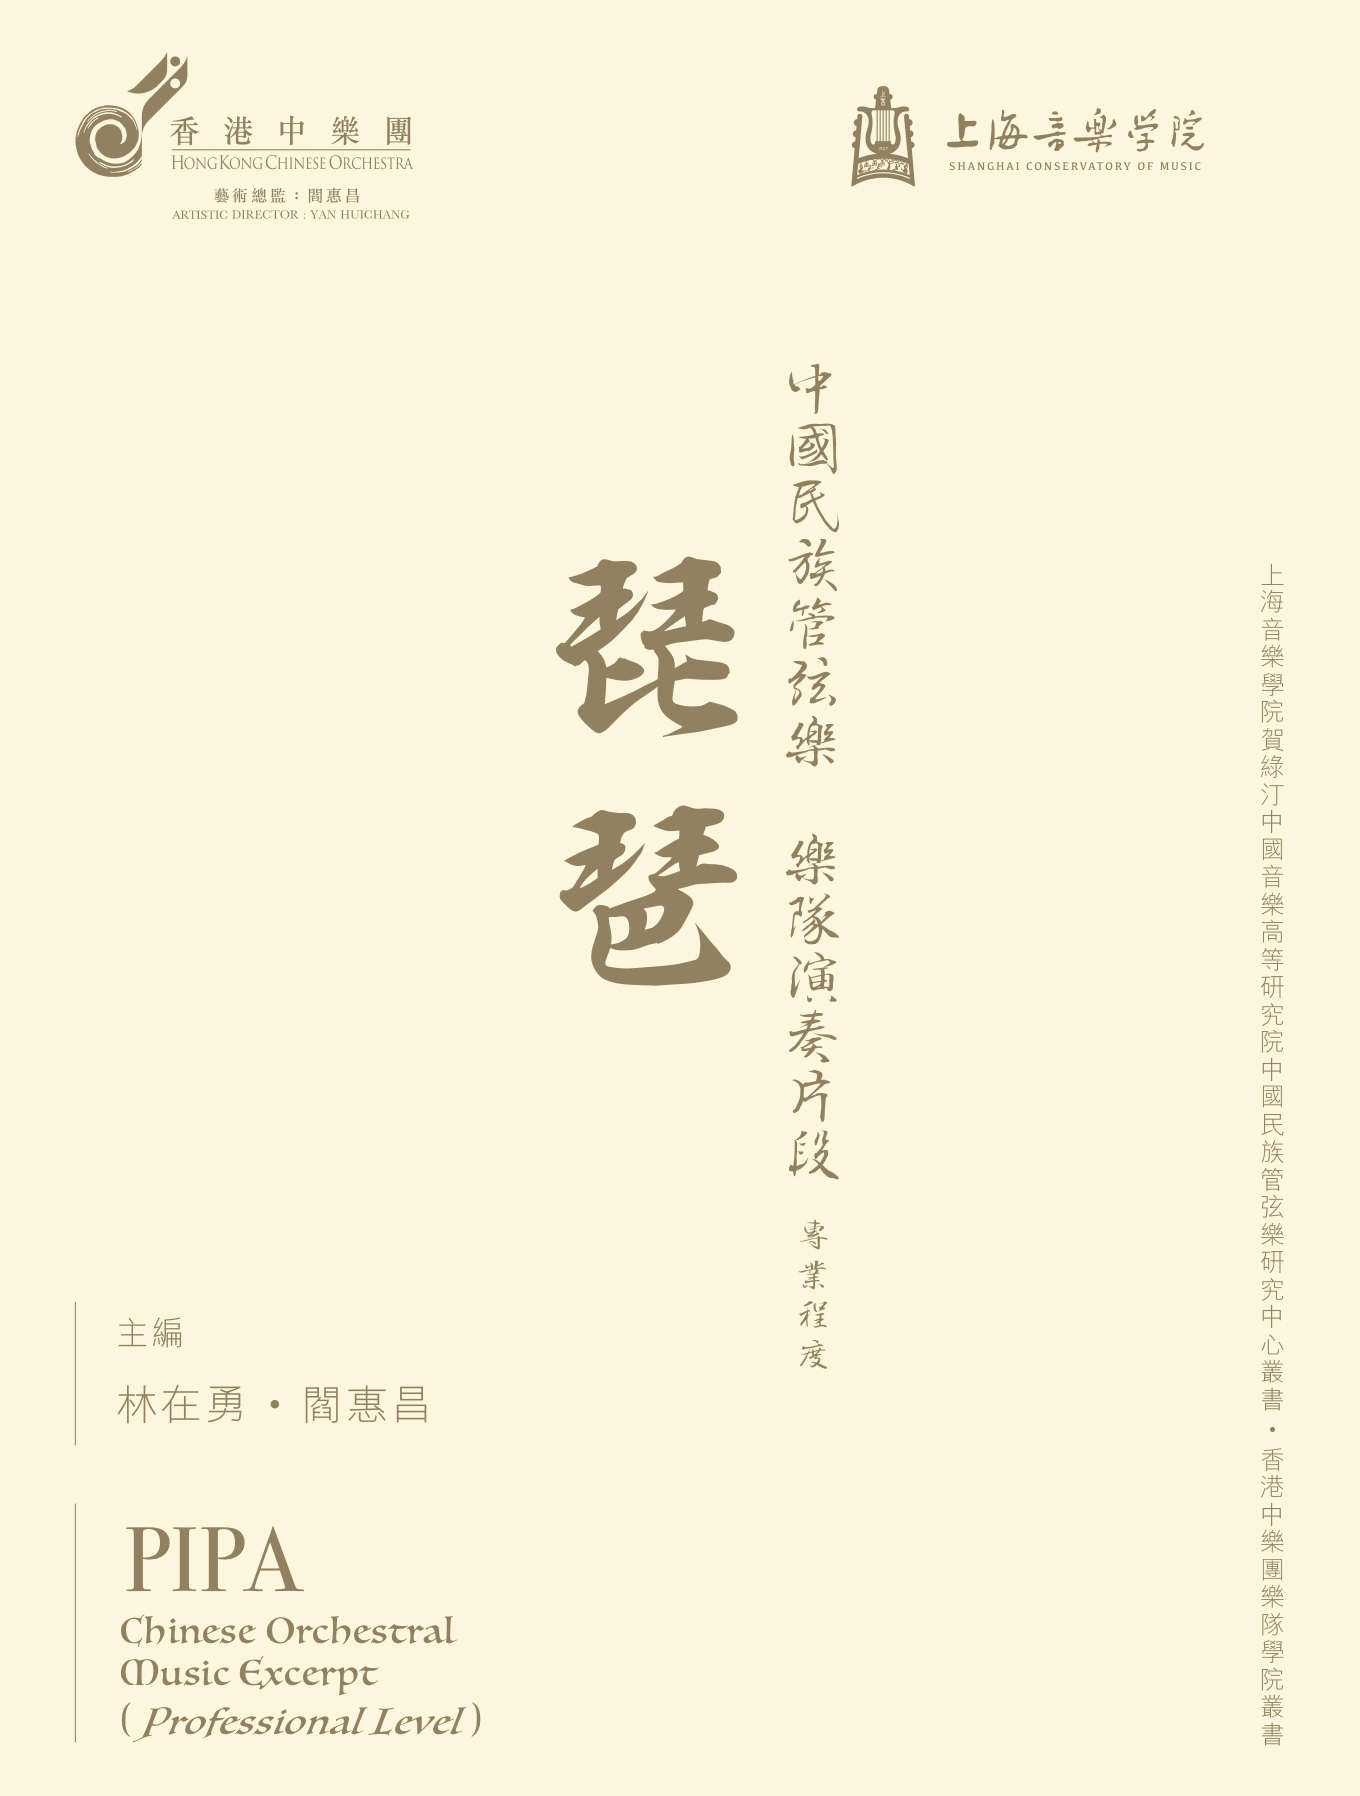 Pipa - Chinese Orchestral Music Excerpt